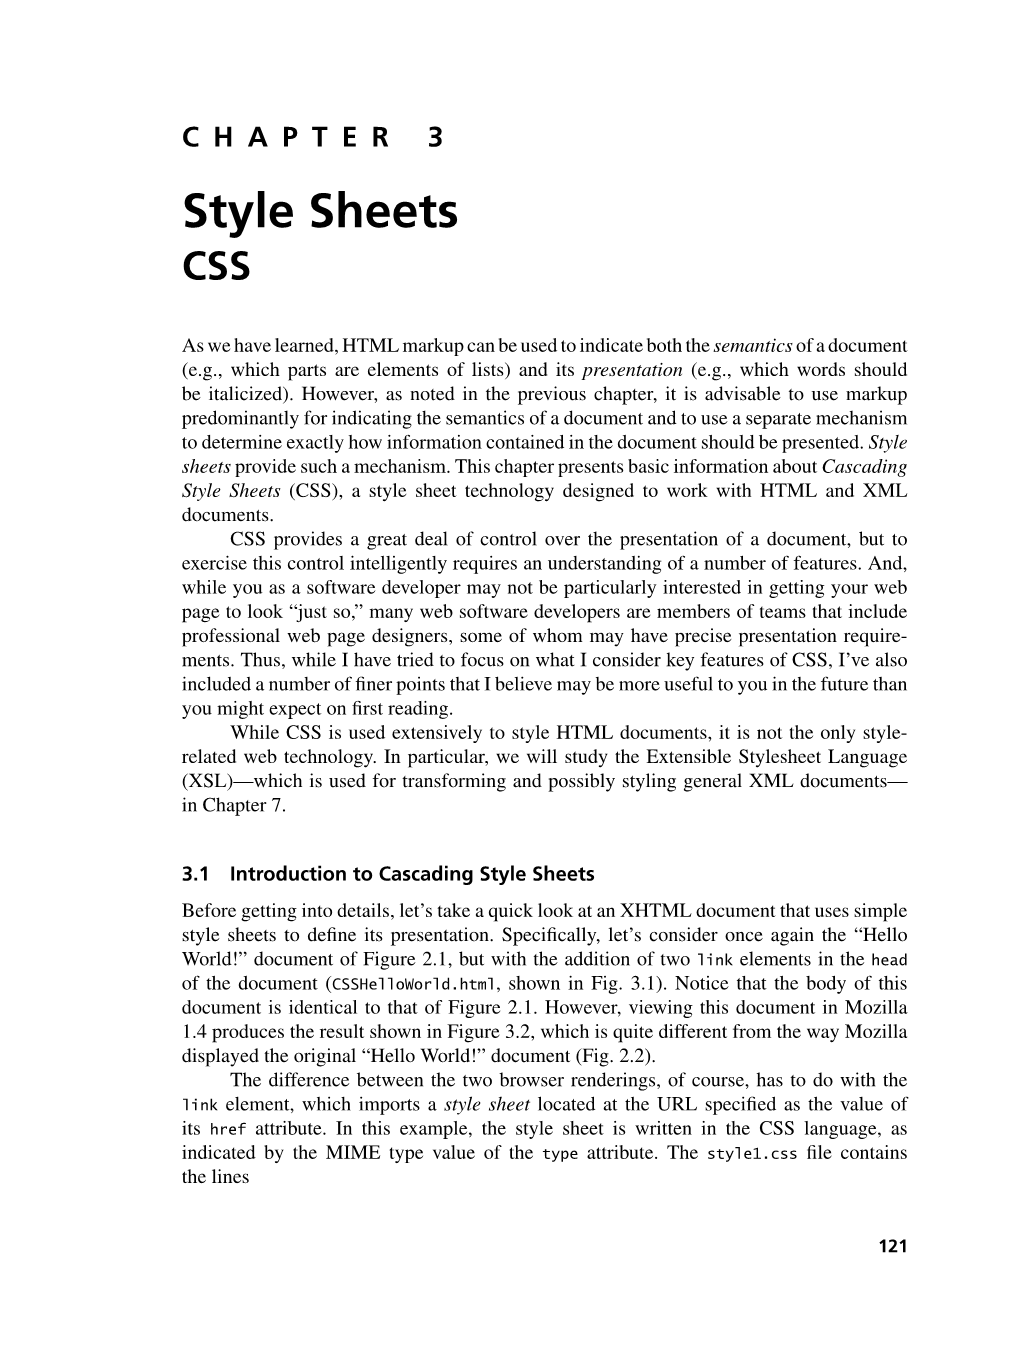 Style Sheets CSS